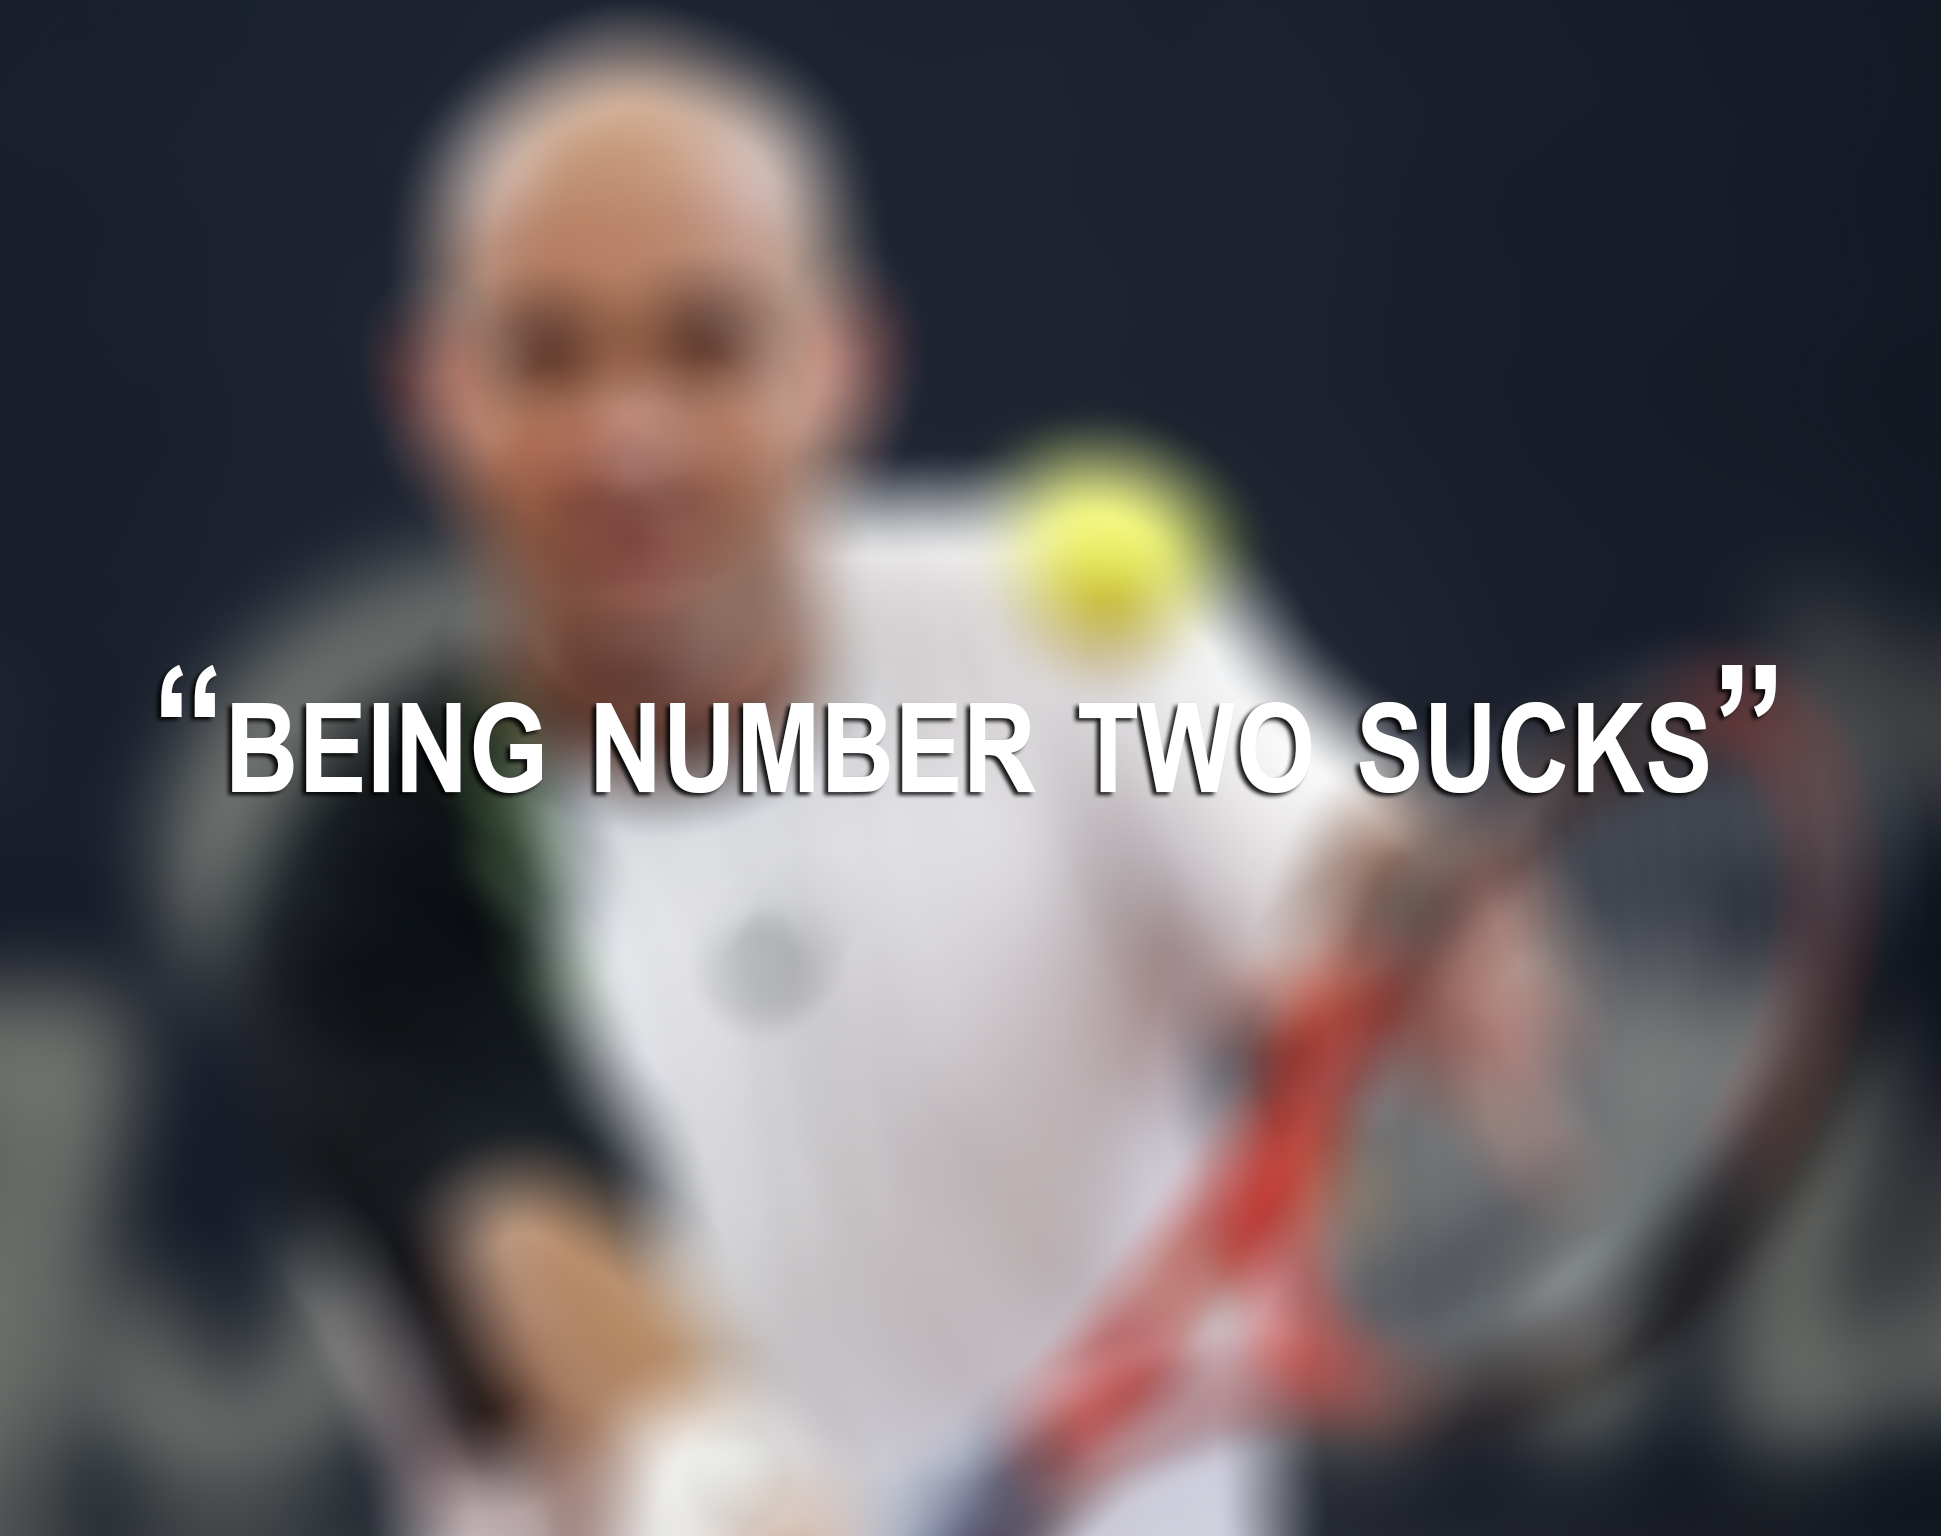 ANDRE AGASSI - Famous Tennis Quotes